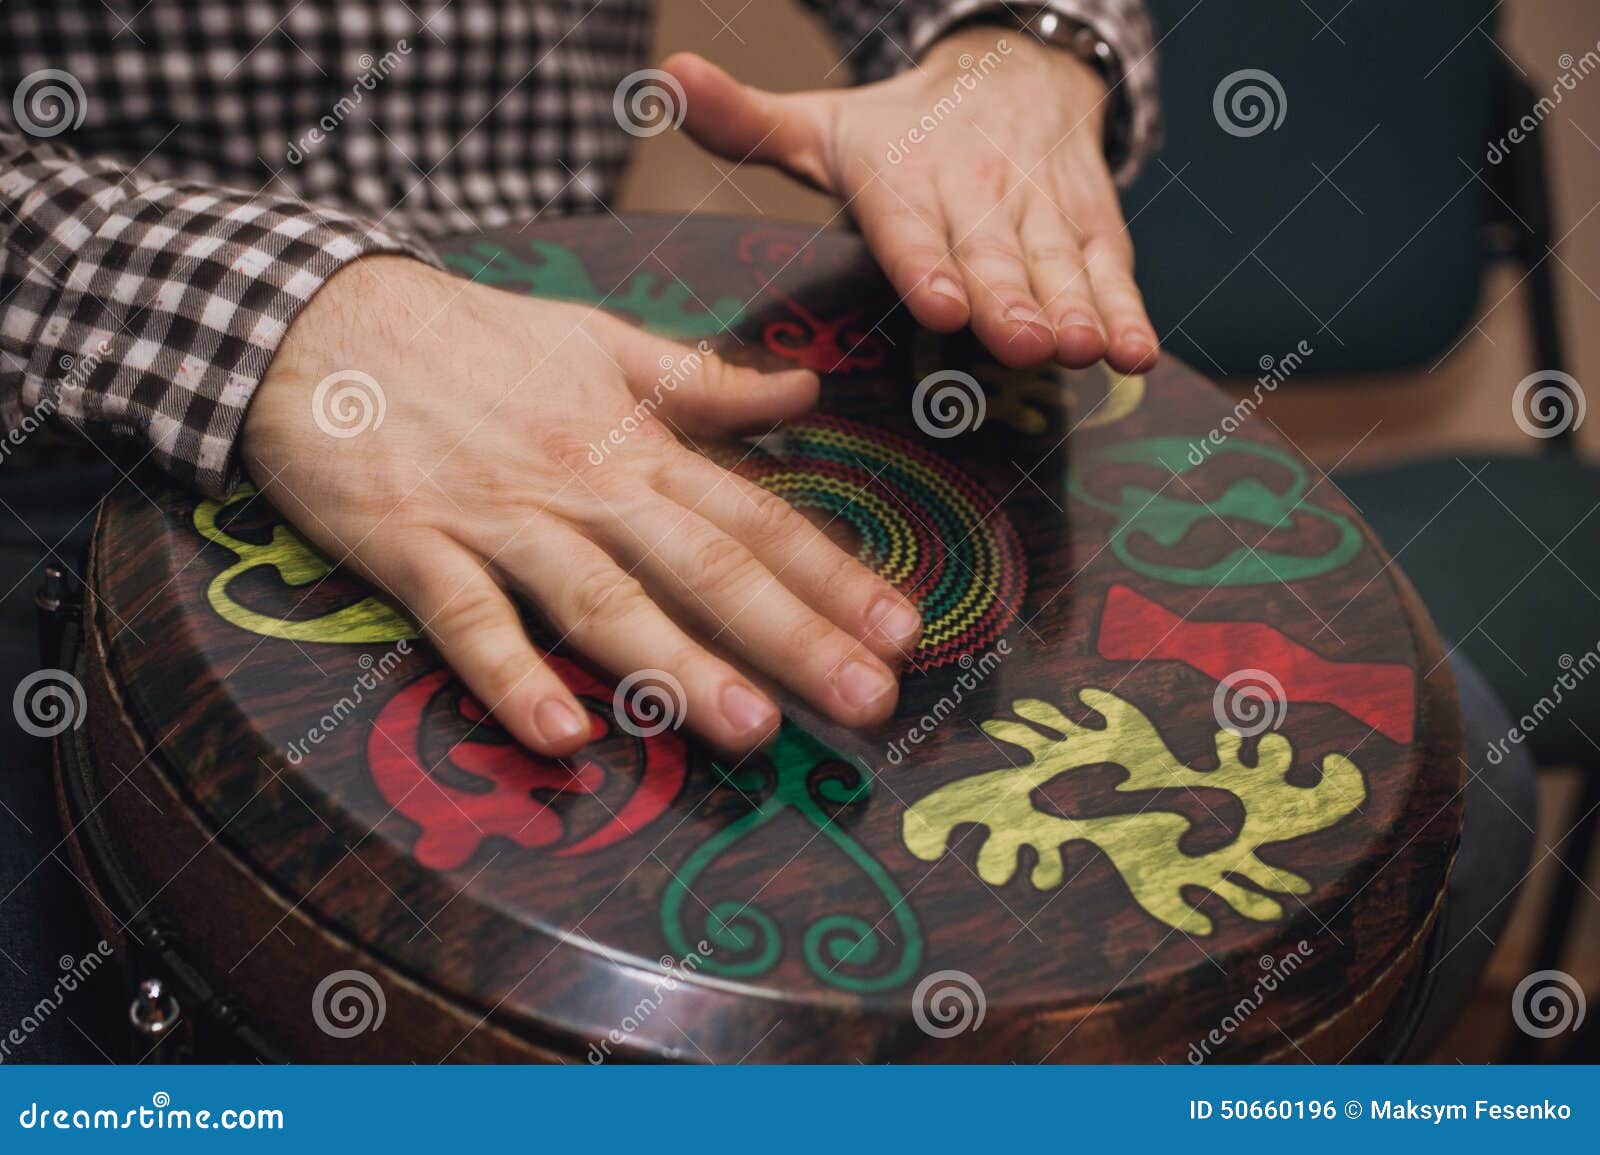 person playing on jambe drum no face